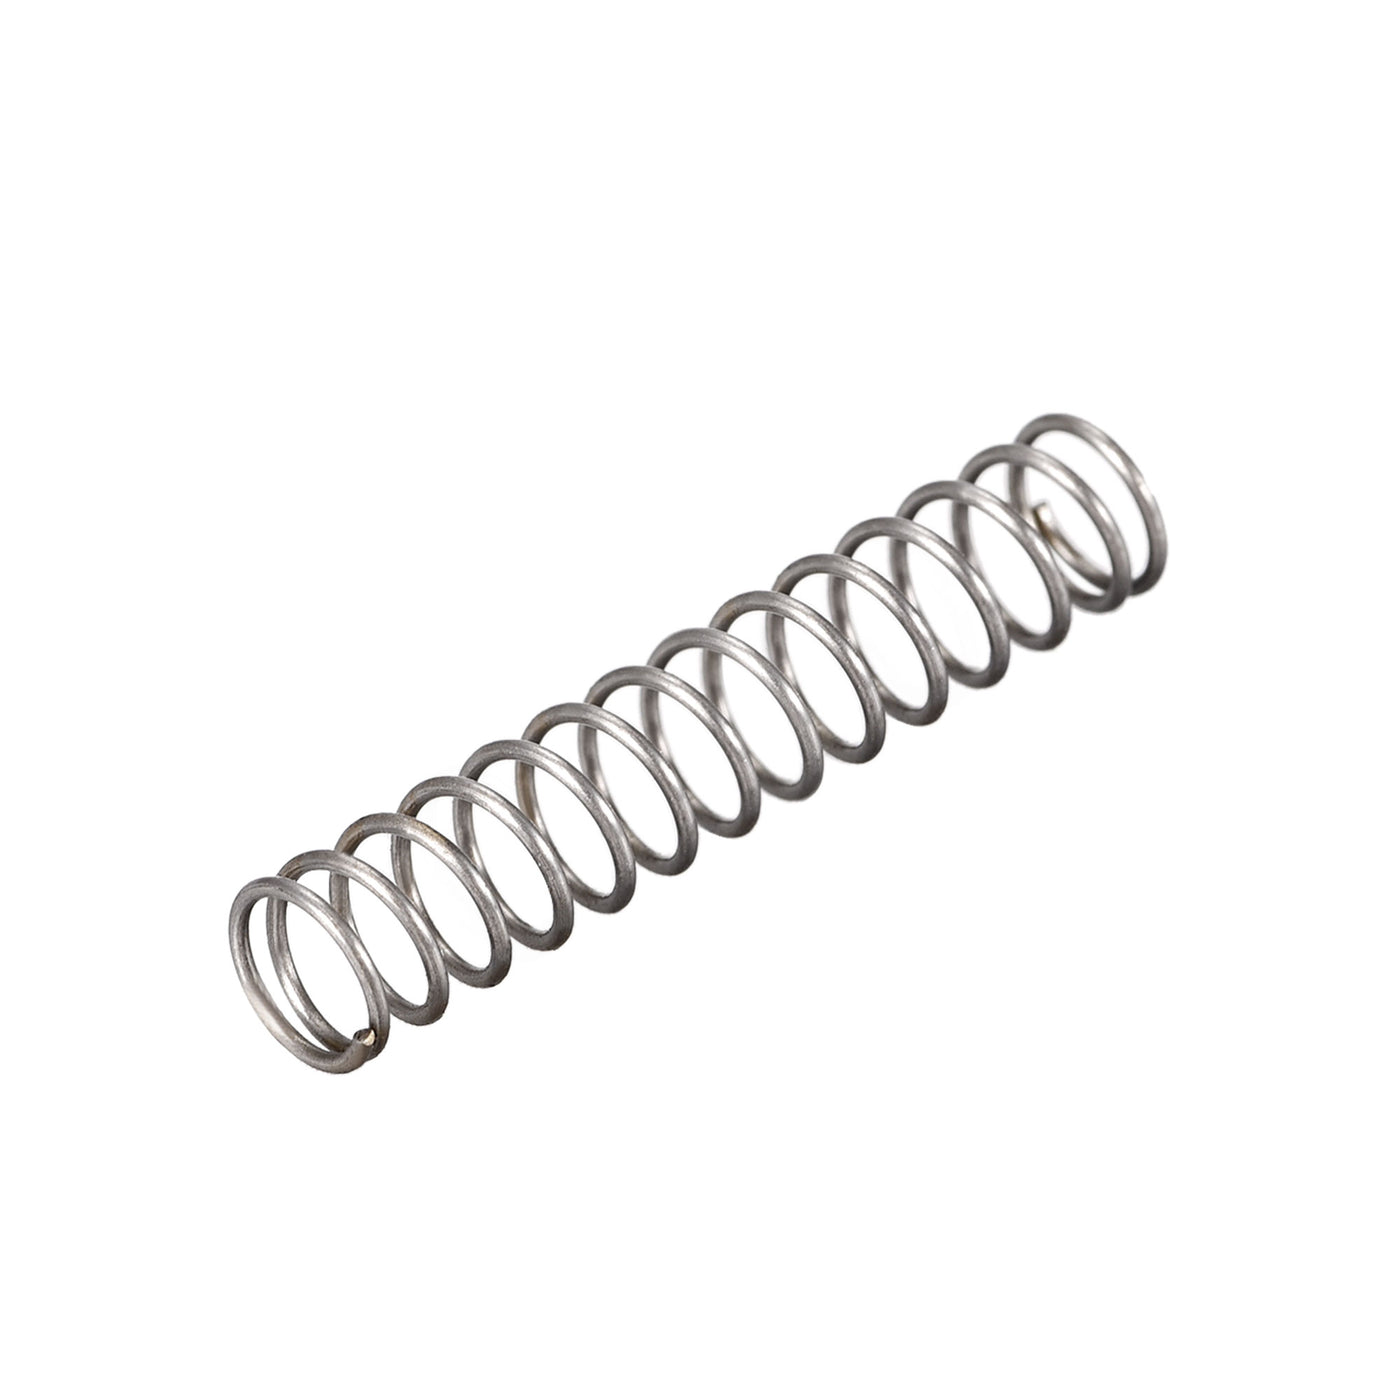 uxcell Uxcell Compressed Spring,5mmx0.5mmx25mm Free Length,10.6N Load Capacity,Gray,30pcs